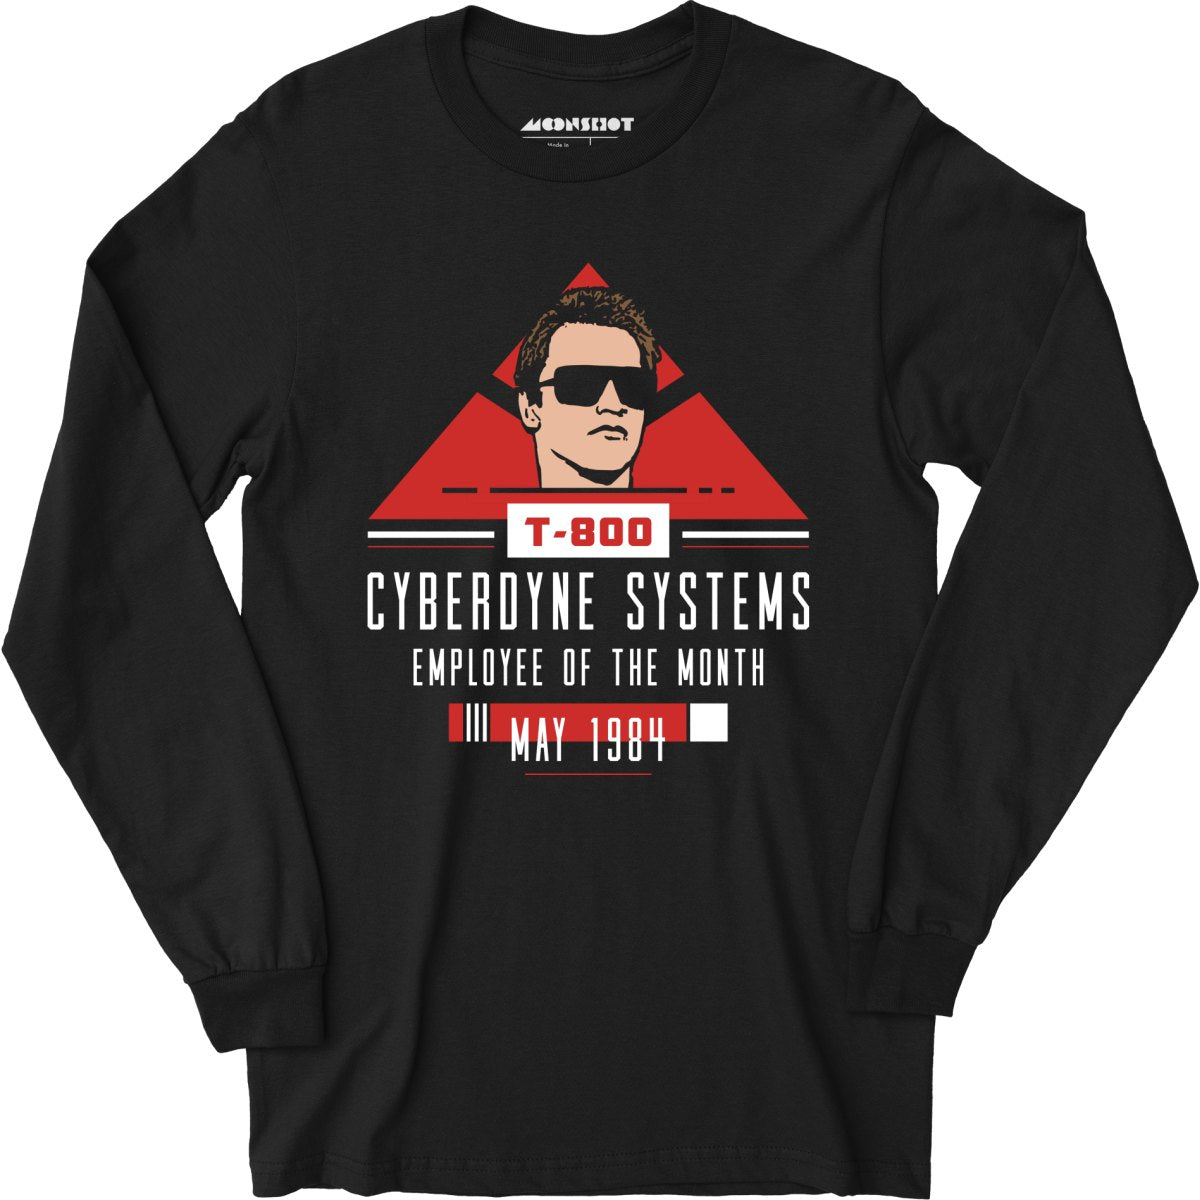 T-800 Cyberdyne Systems Employee of the Month - Long Sleeve T-Shirt